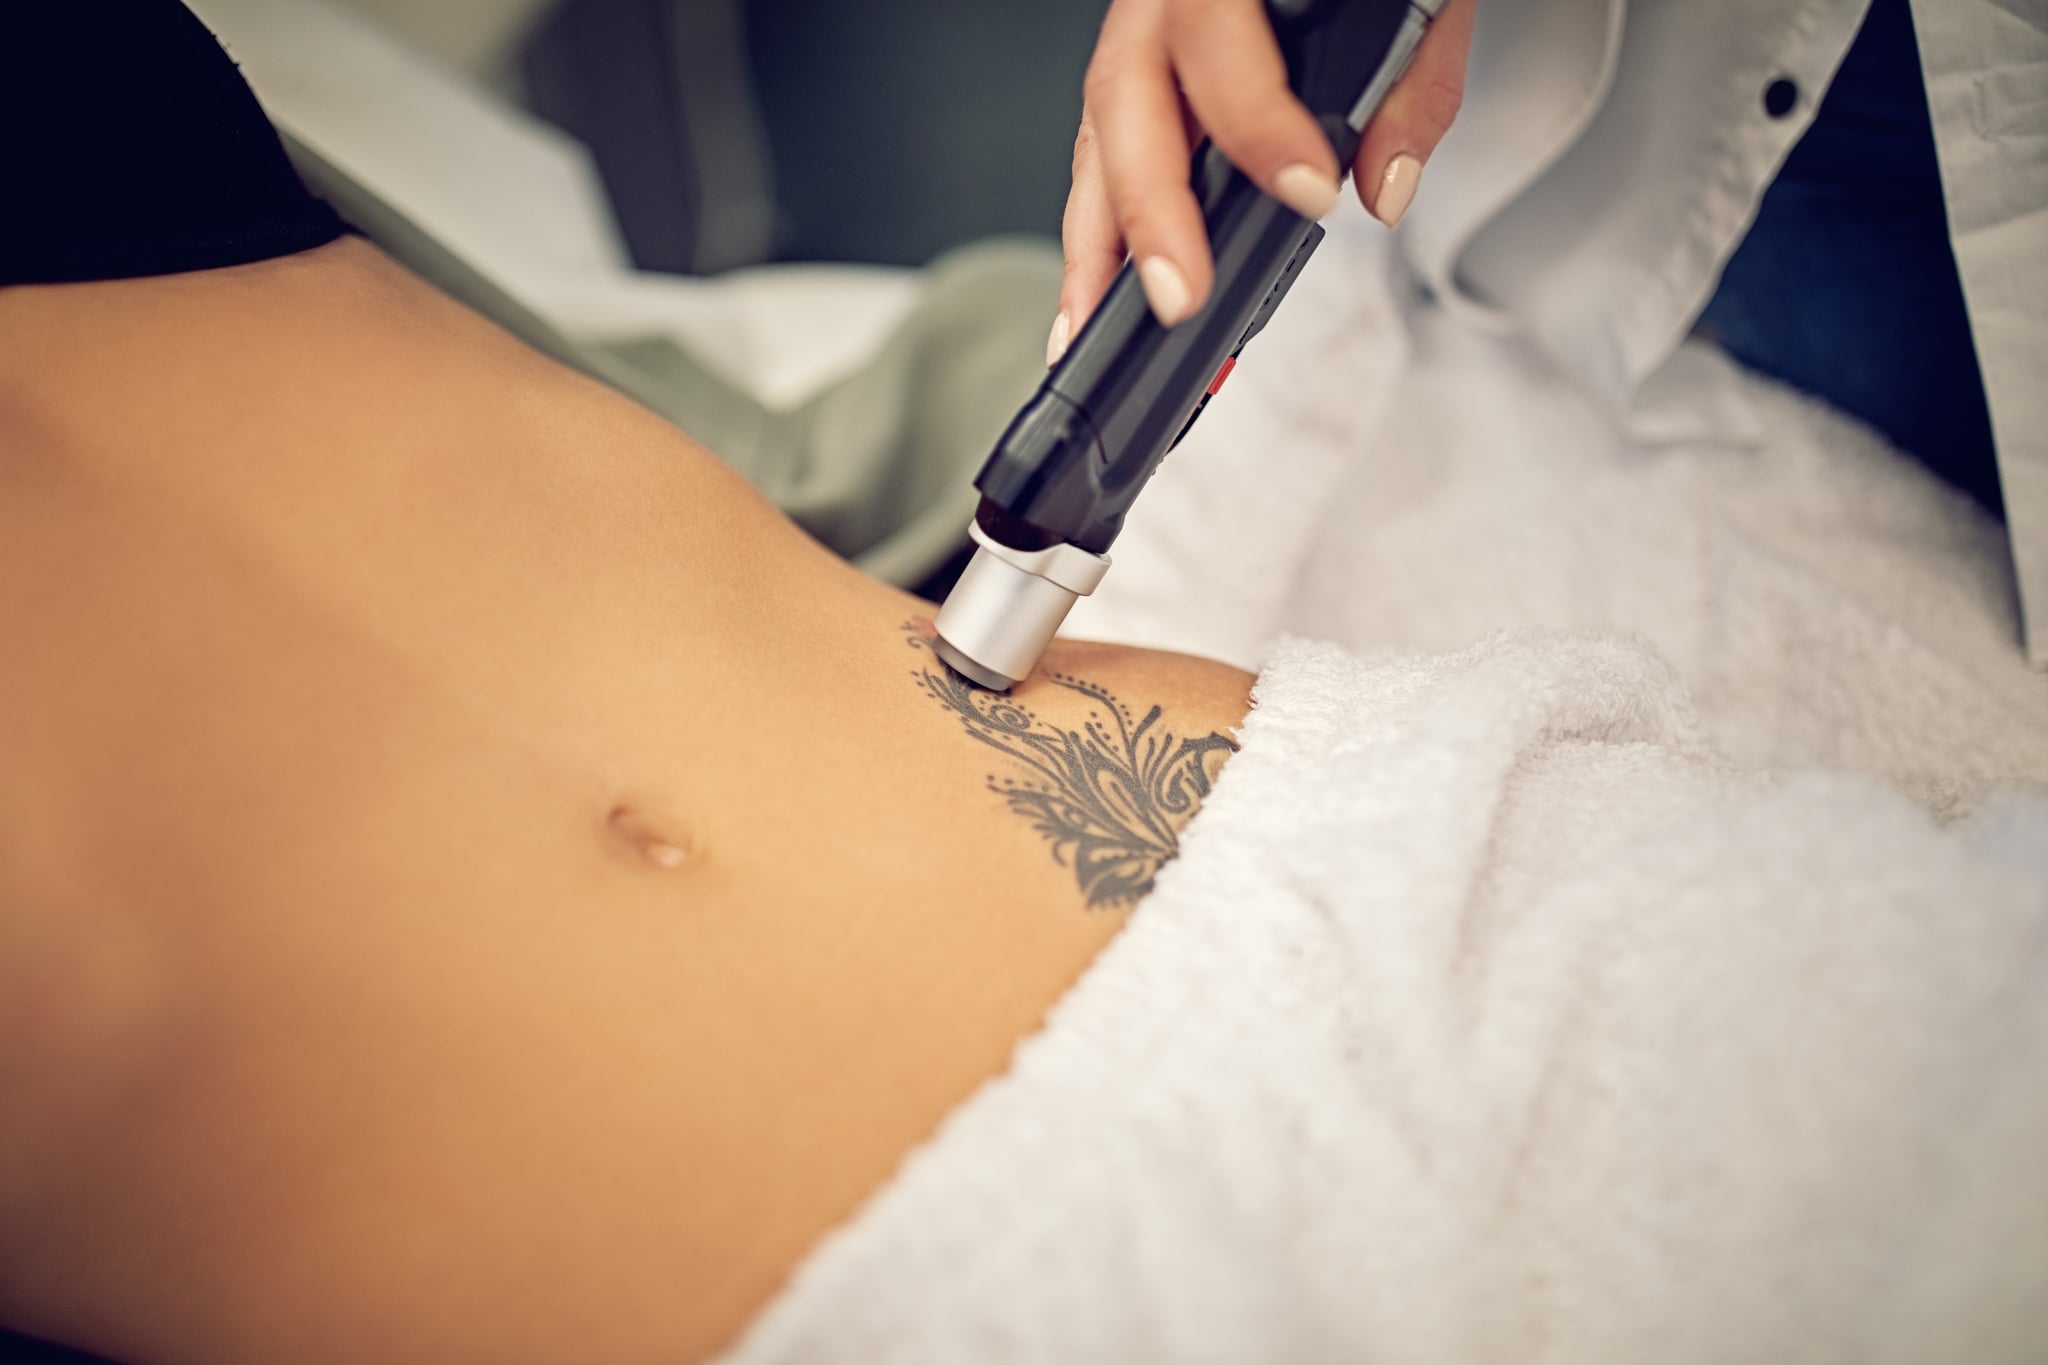 Three Laser TattooRemoval Sessions for up to 5 12 or 15 Square Inches at  LaserAway Up to 89 Off Discount Coupon Code  UpcomingEventscom